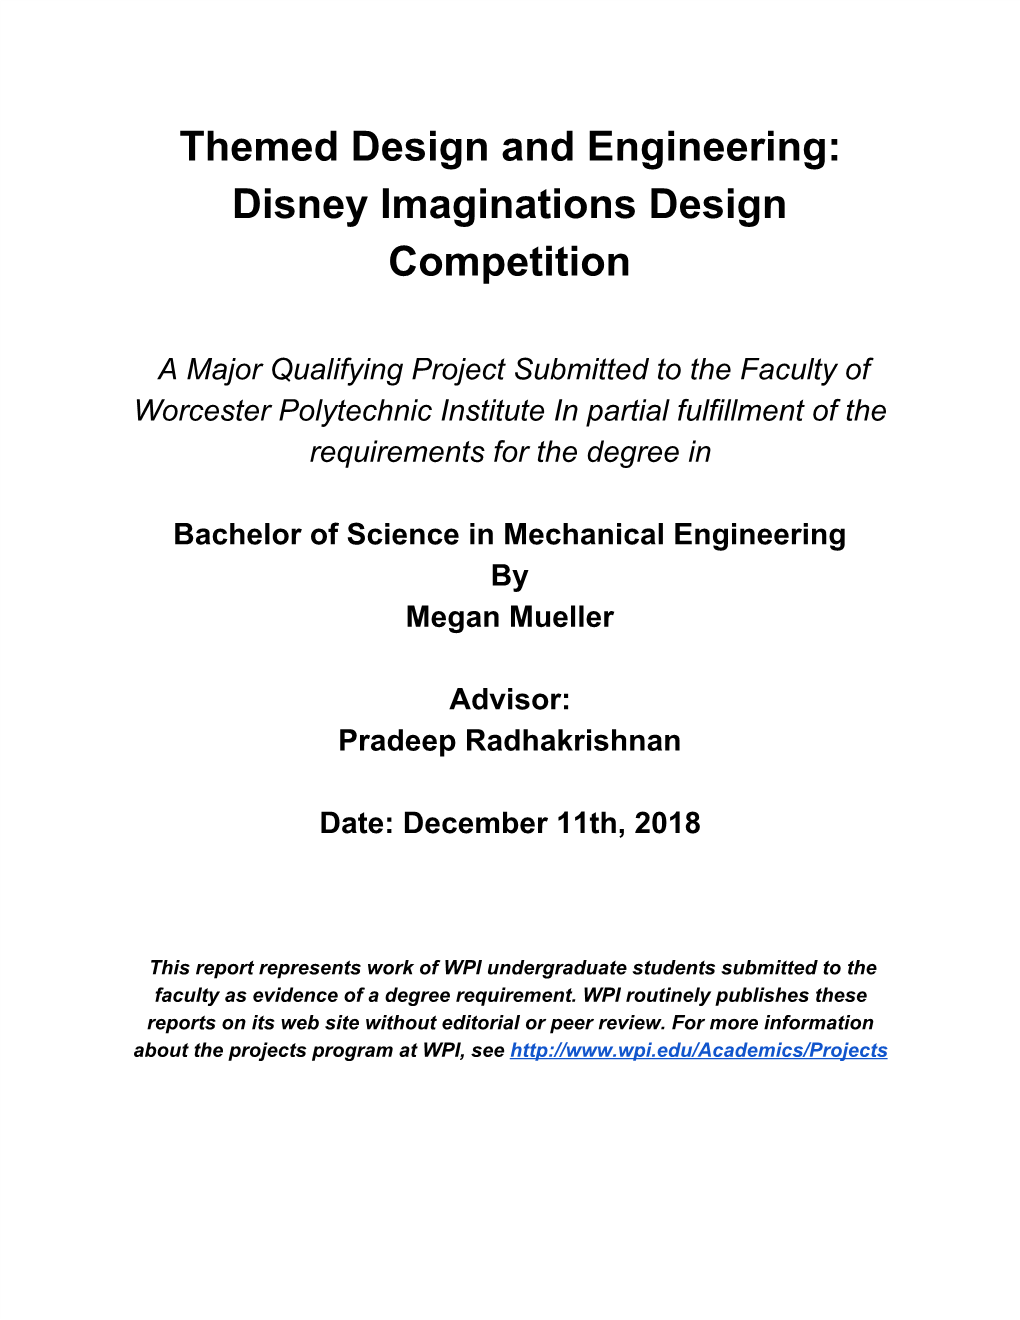 Themed Design and Engineering: Disney Imaginations Design Competition